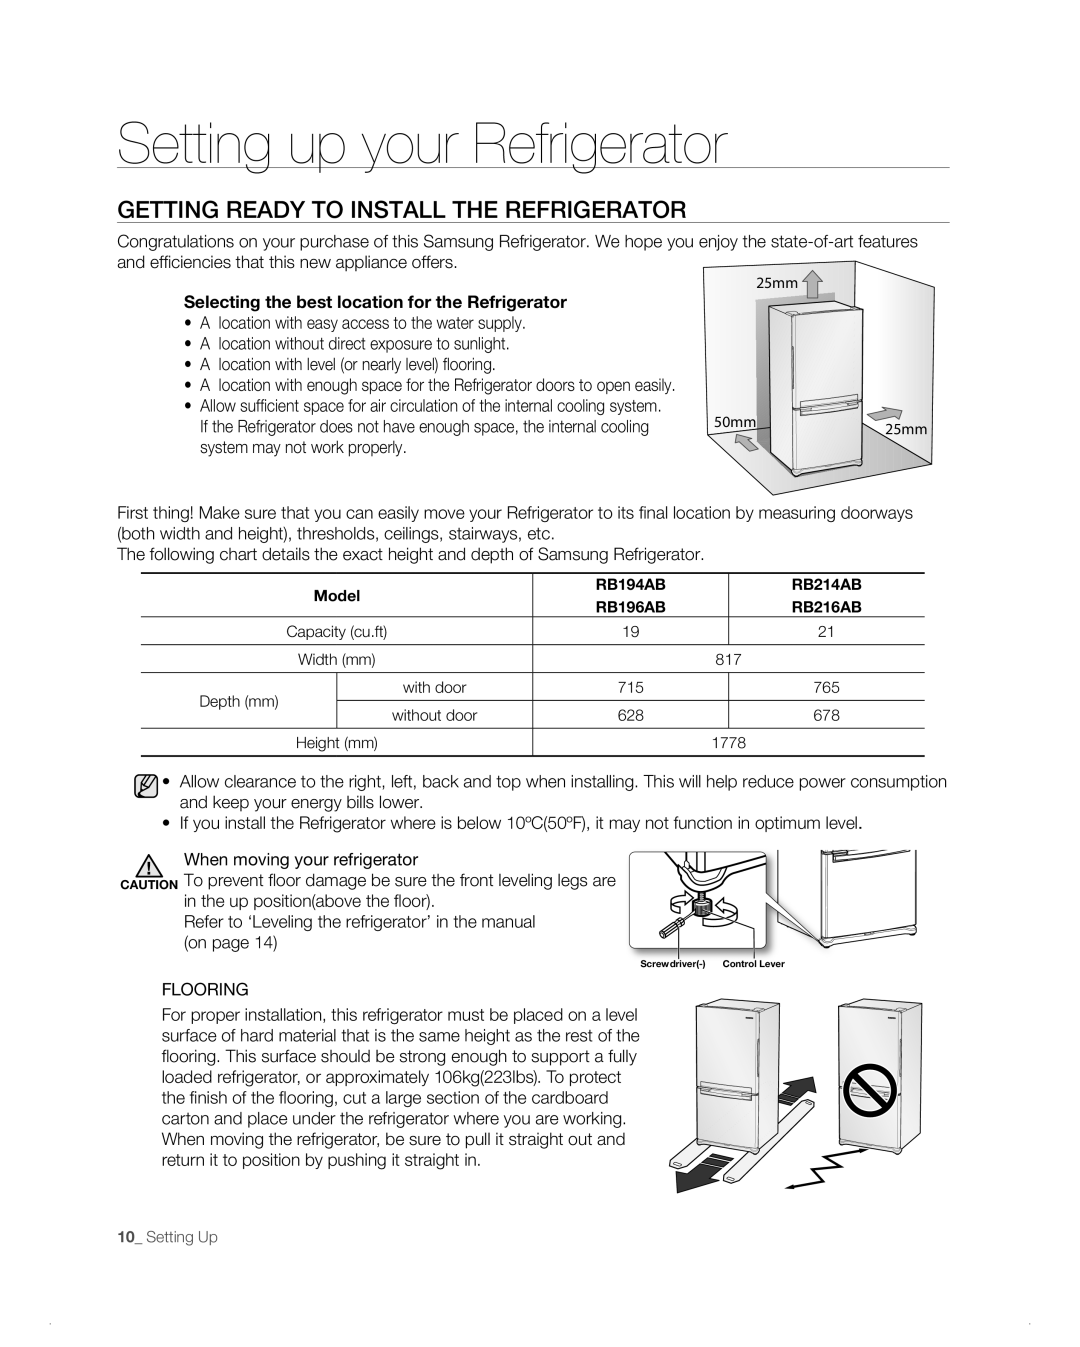 Samsung RB194AB, RB216AB, RB1AB, RB214AB, RB196AB Setting up your Refrigerator, GEttinG READy to instALL tHE REFRiGERAtoR 